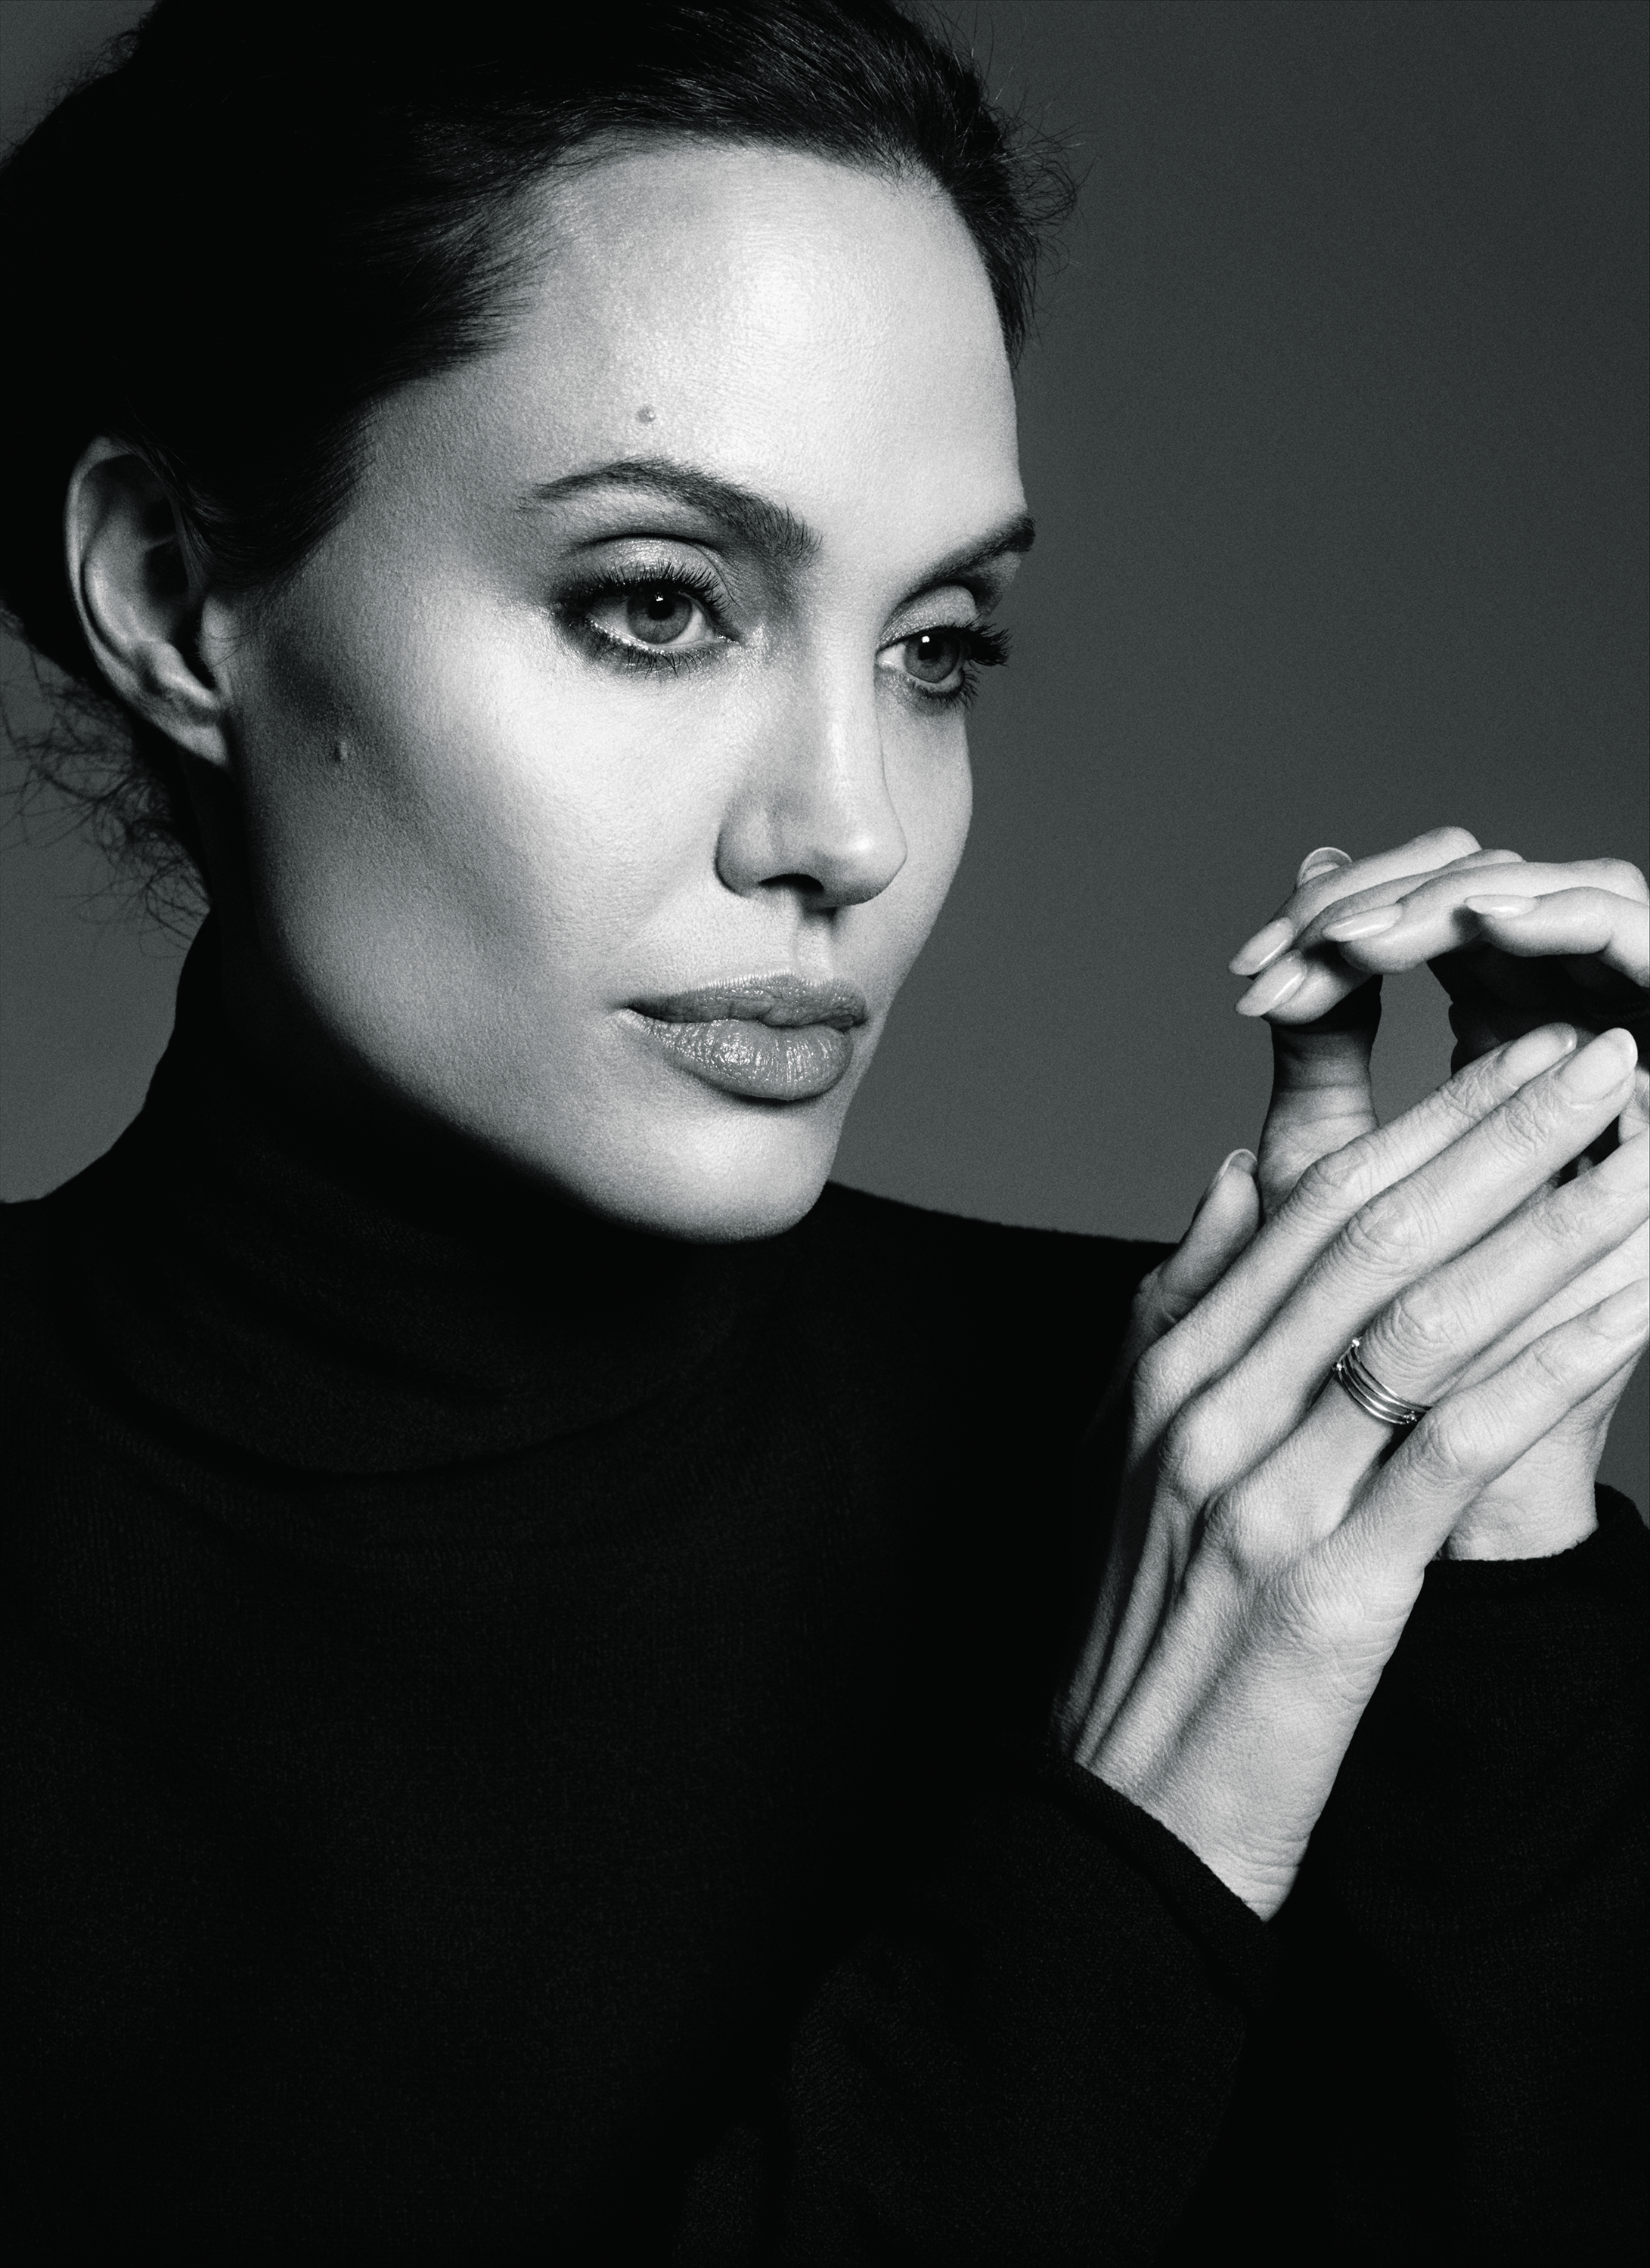 The biggest star in her own movie. Angelina Jolie, photographed in Los Angeles. Unbroken is the second film she has directed. (Paola Kudacki for TIME)